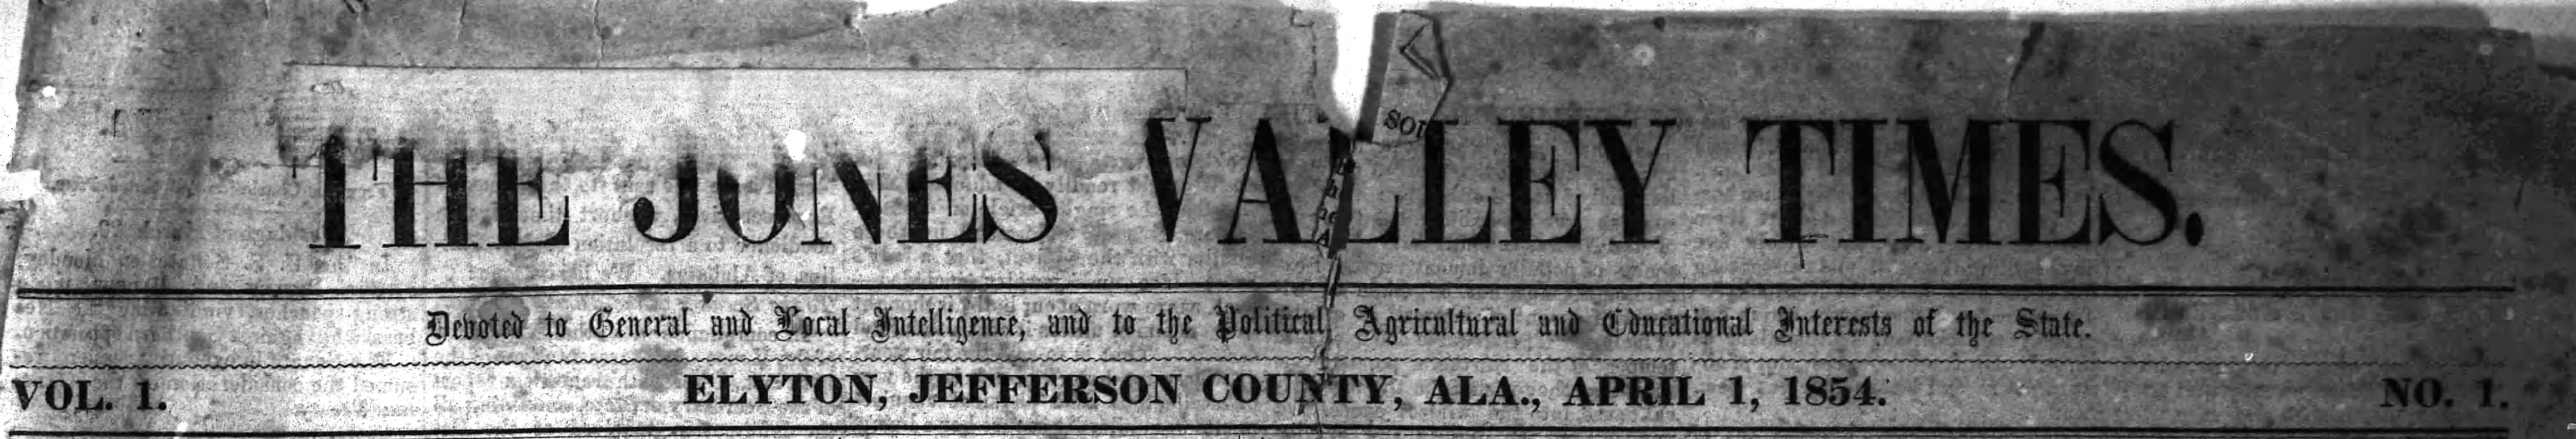 PATRON – Personal and local news from around Jones Valley and Elyton April 1, 1854